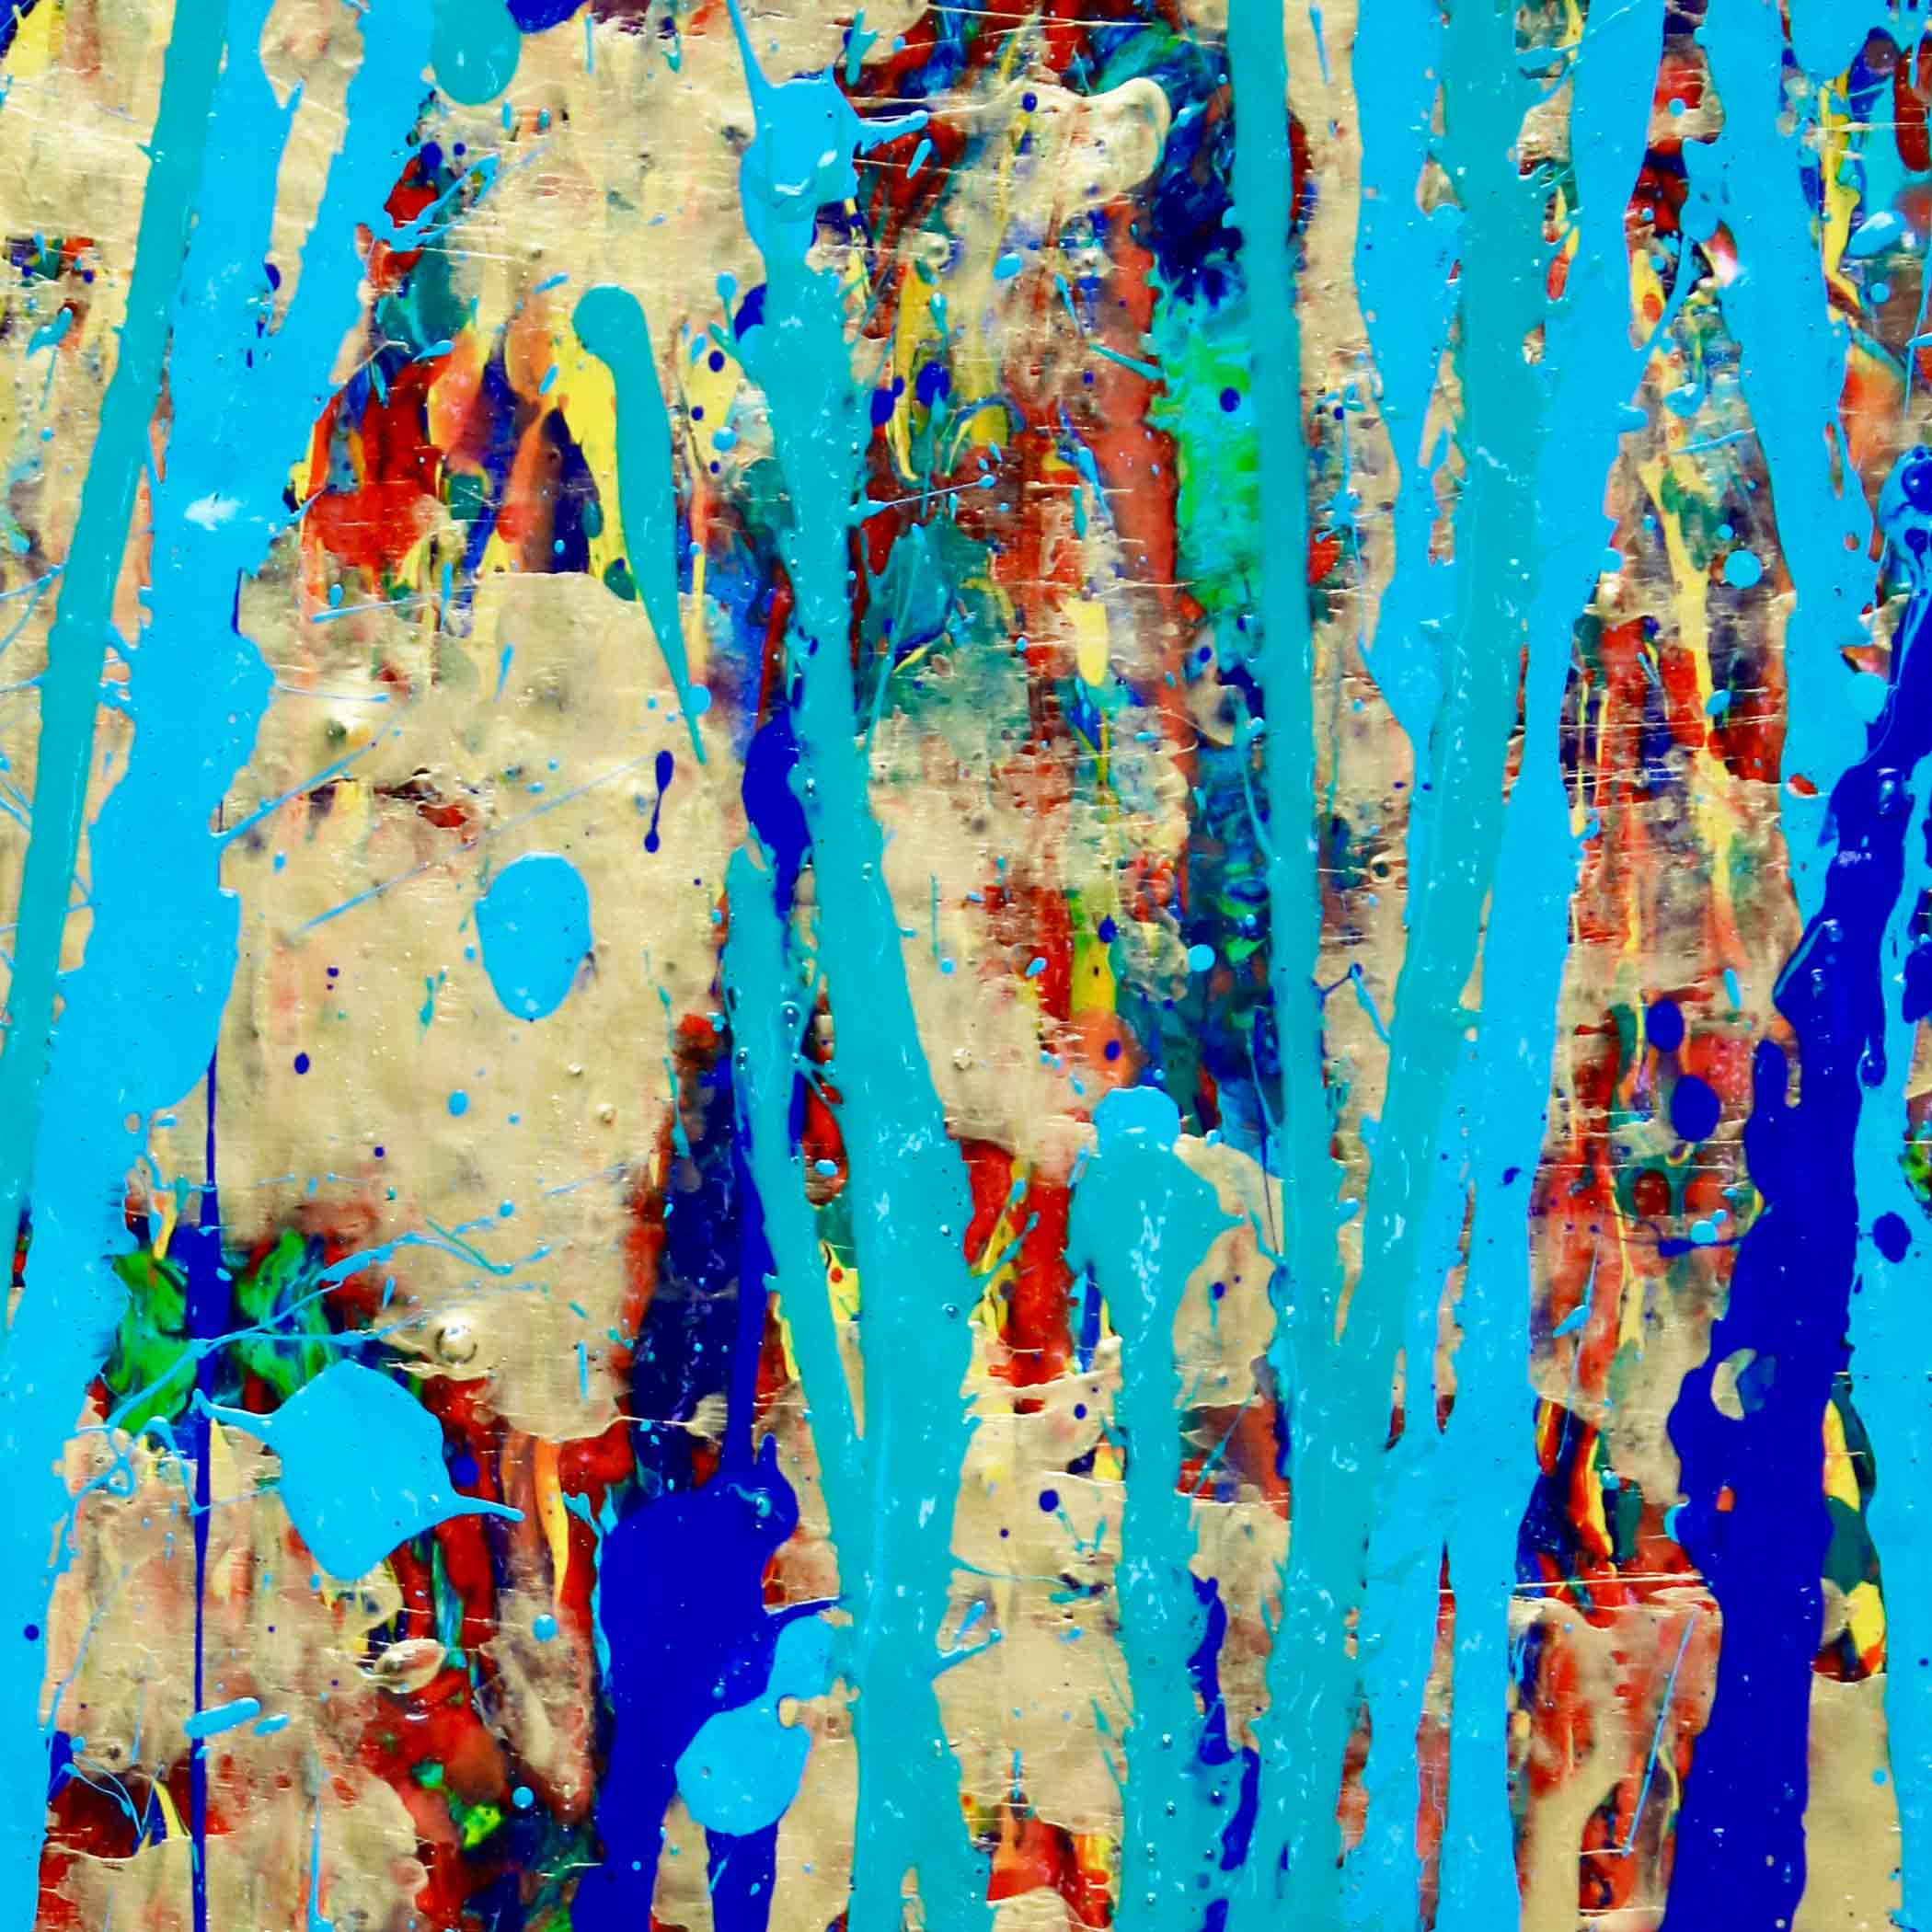 SOLD / Impulsive Spectra - Abstract expressionism garden by Nestor Toro